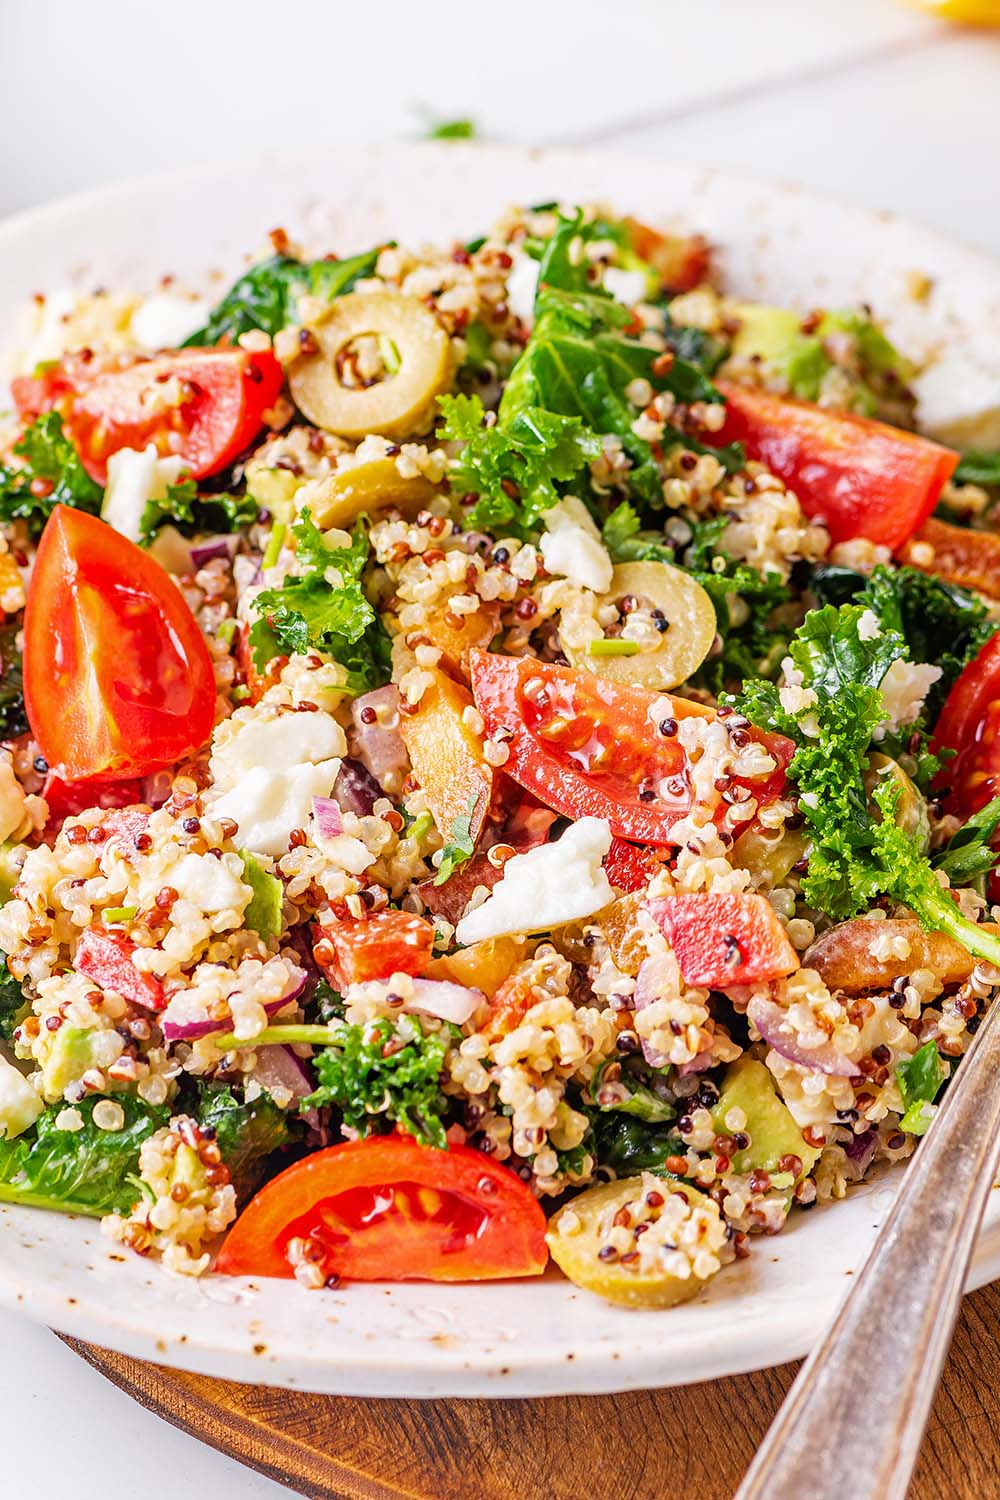 Plate with Mediterranean Salad with Quinoa